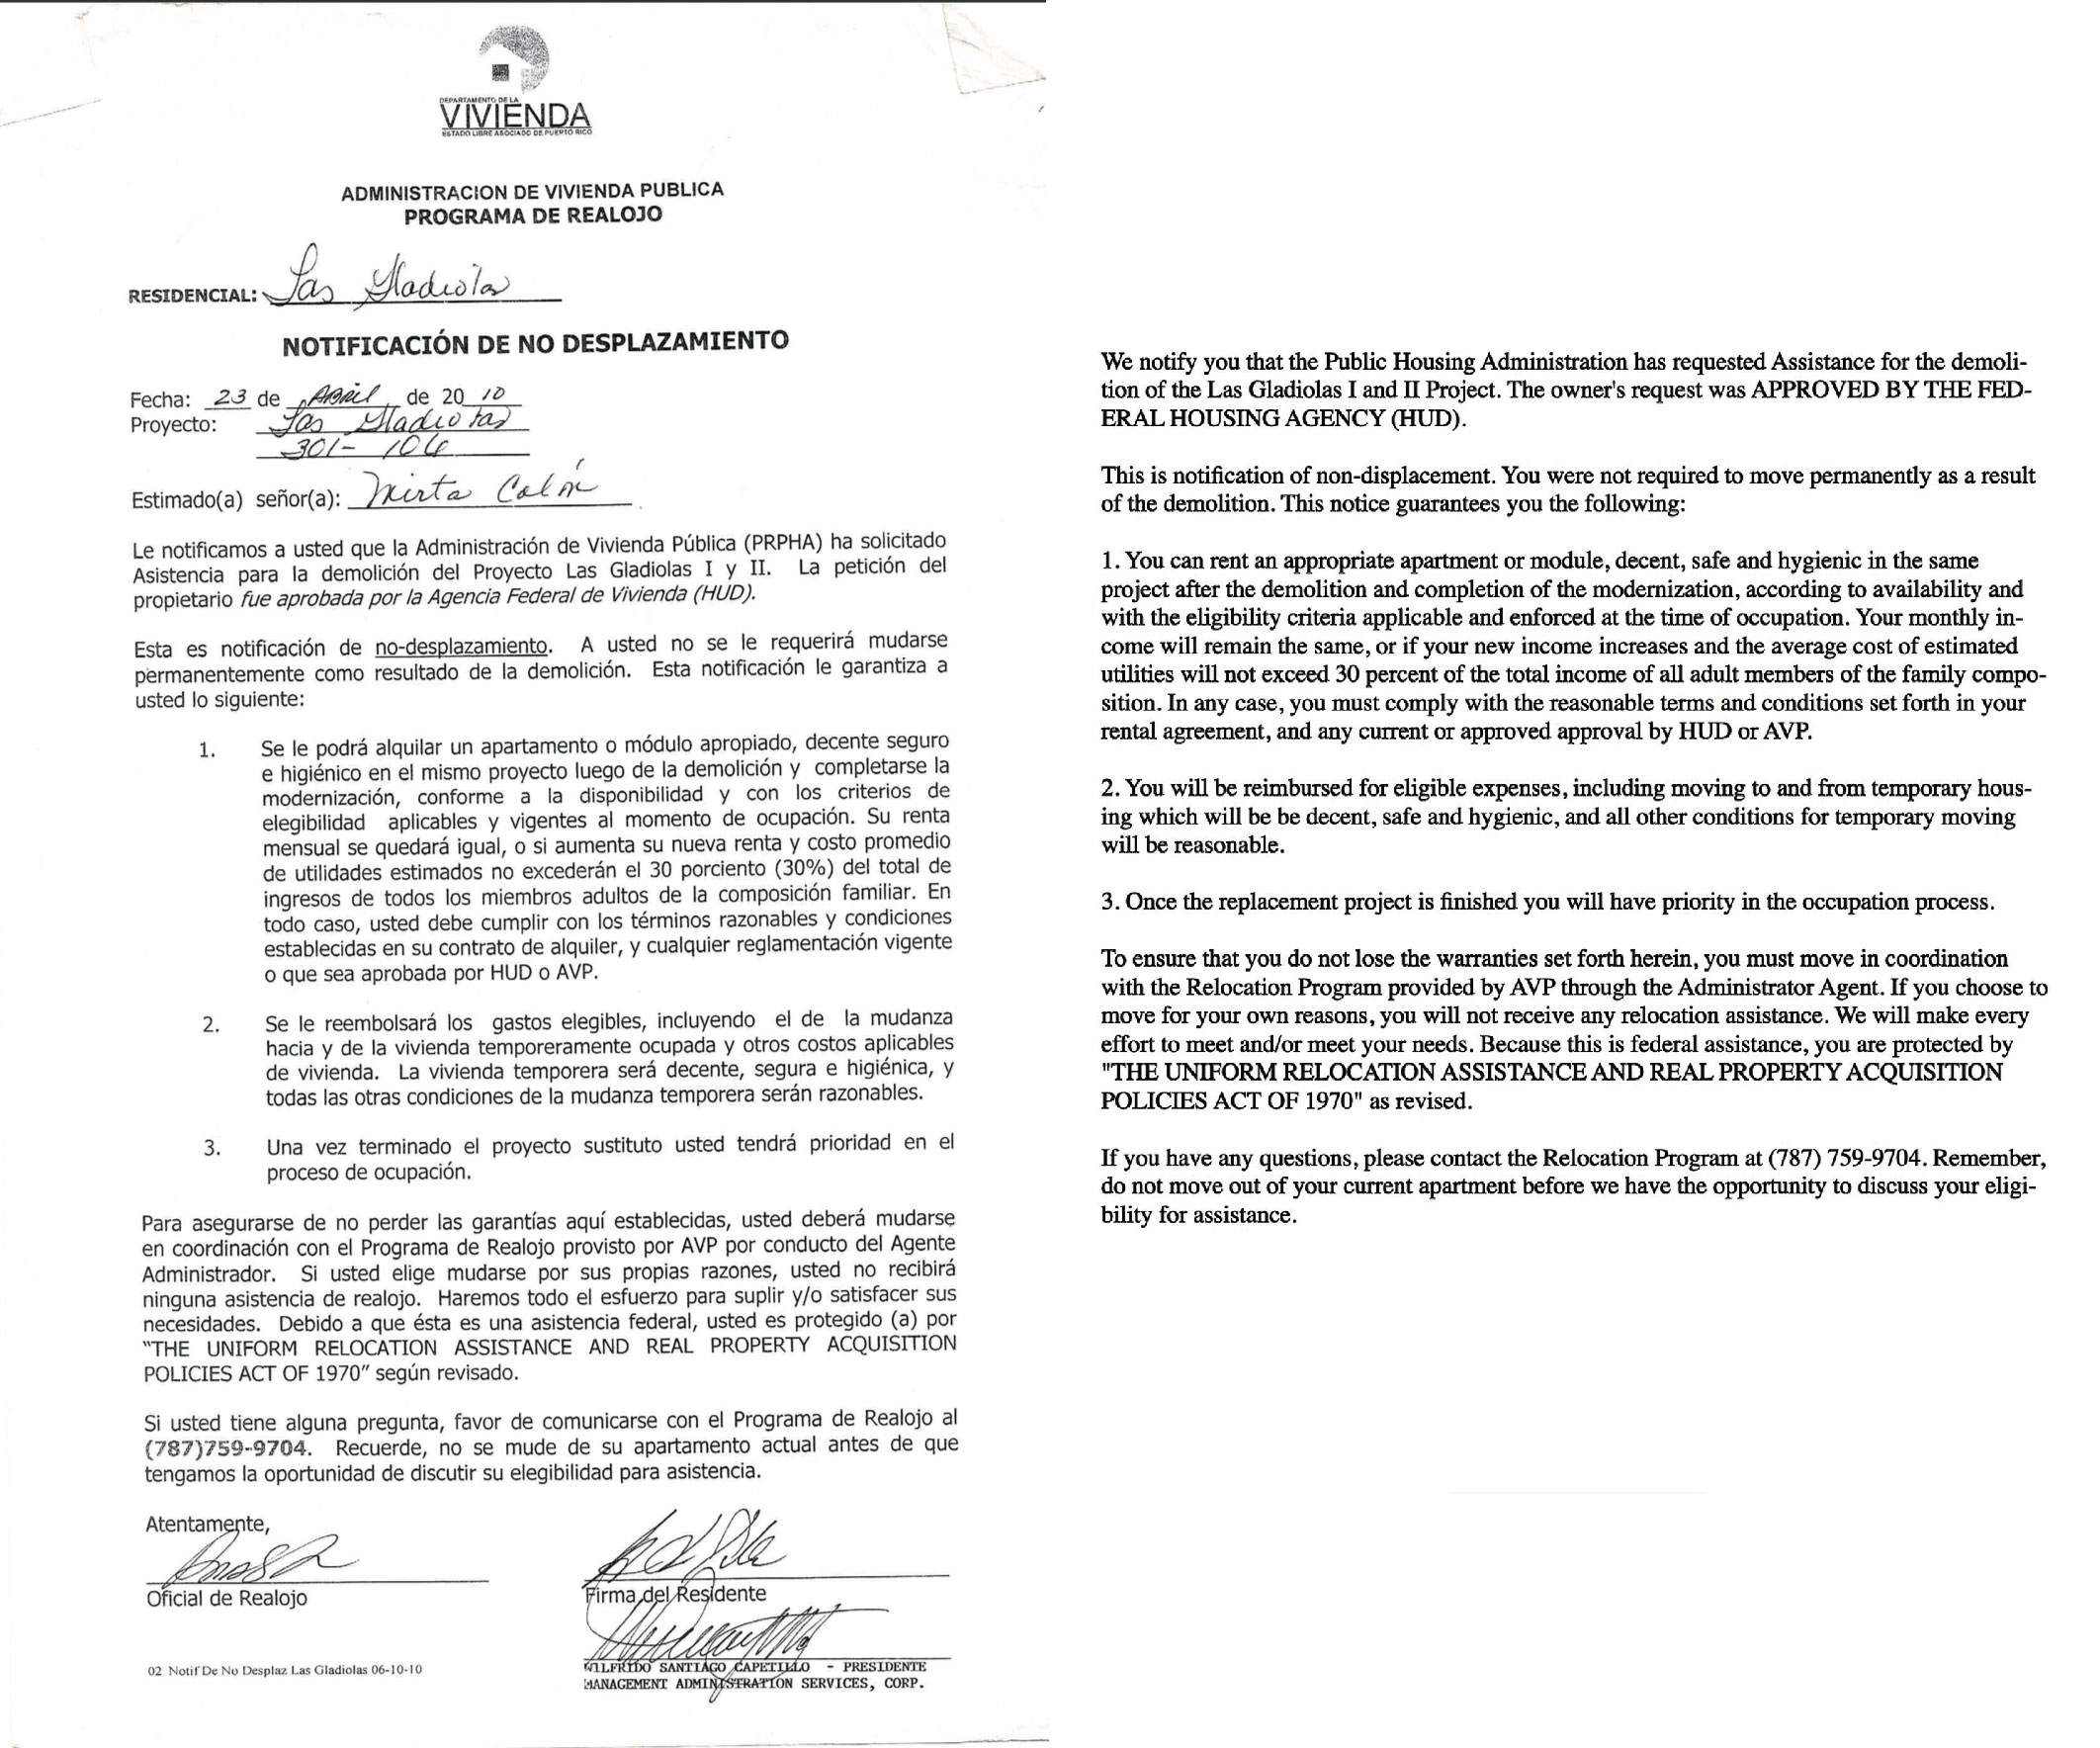 A non-displacement agreement signed by Colón on April 23, 2010.